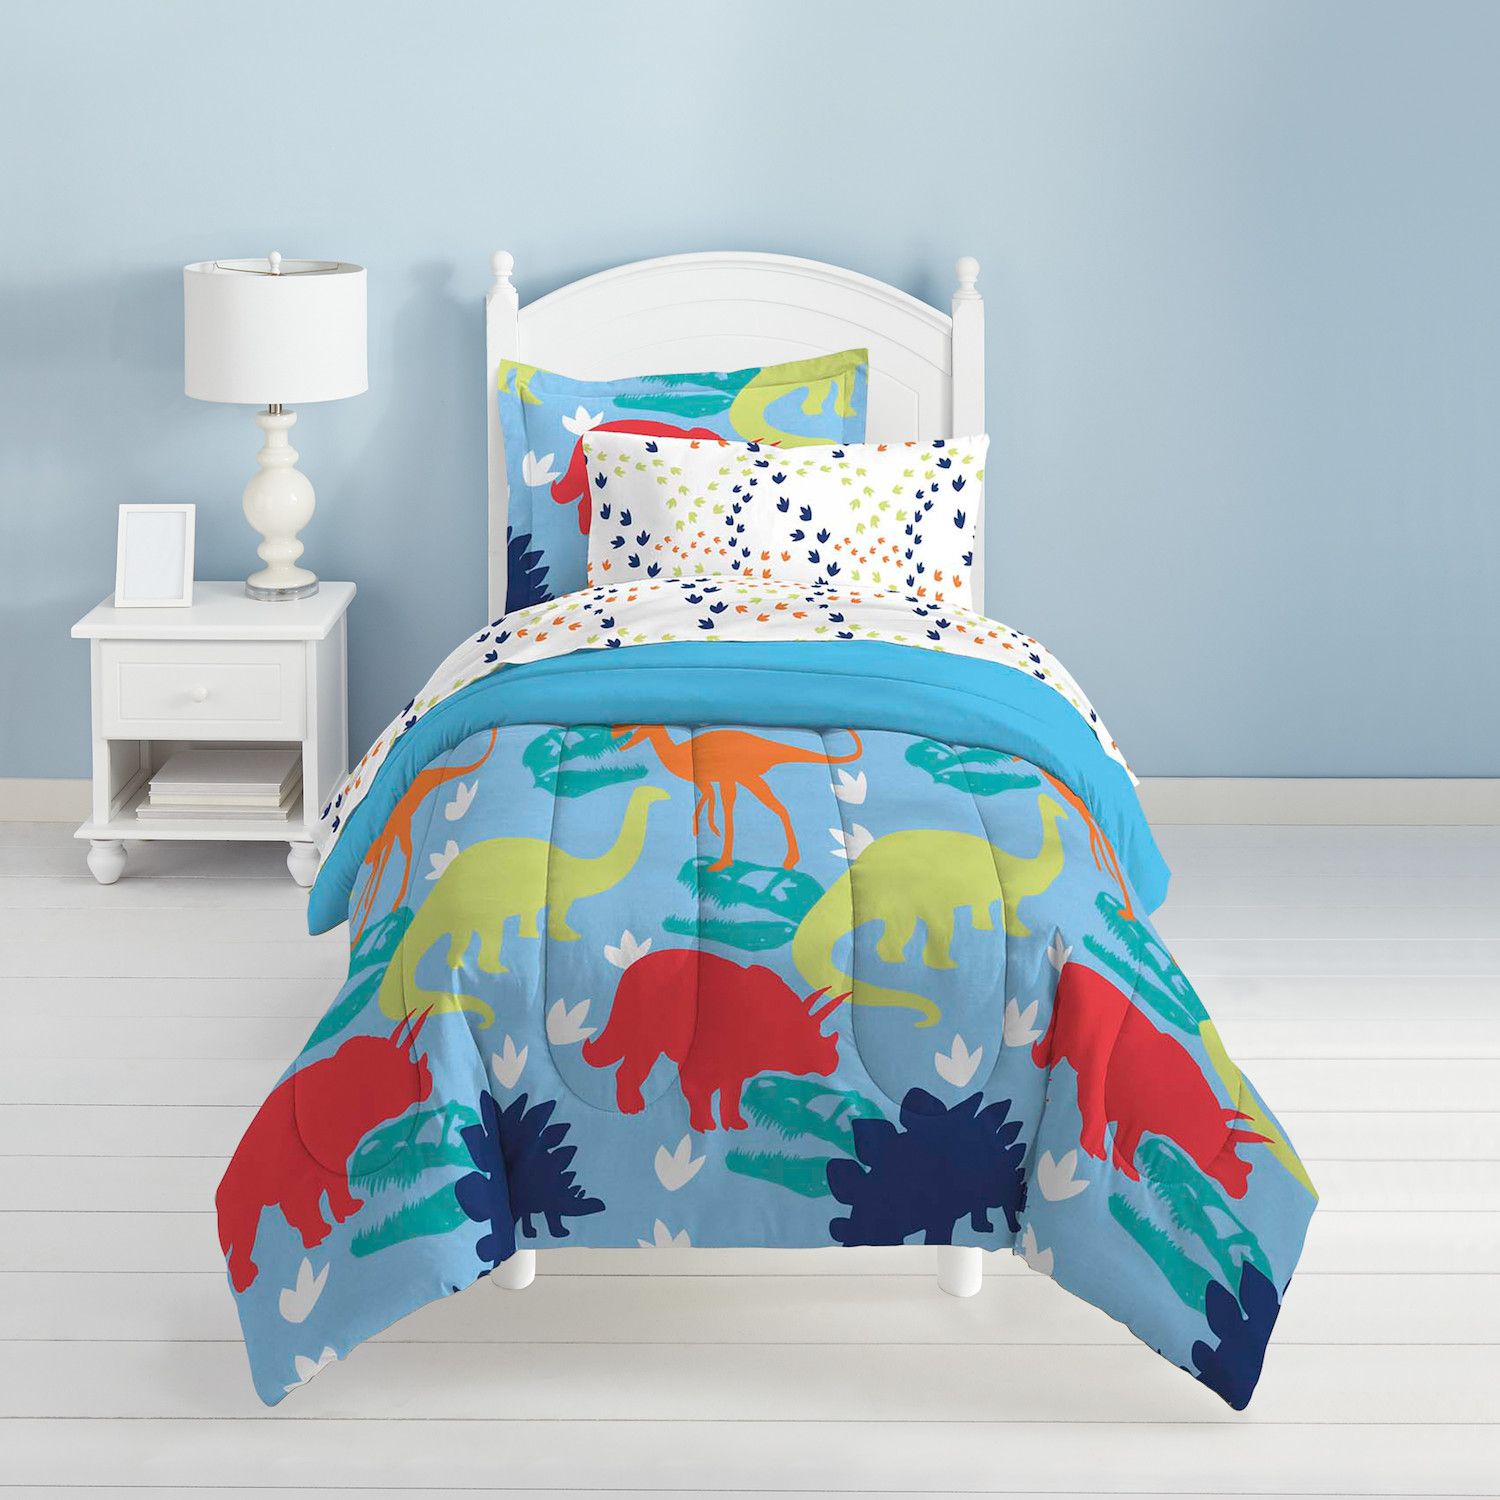 Image for Dream Factory Dinosaur 4-piece Toddler Bed Set at Kohl's.